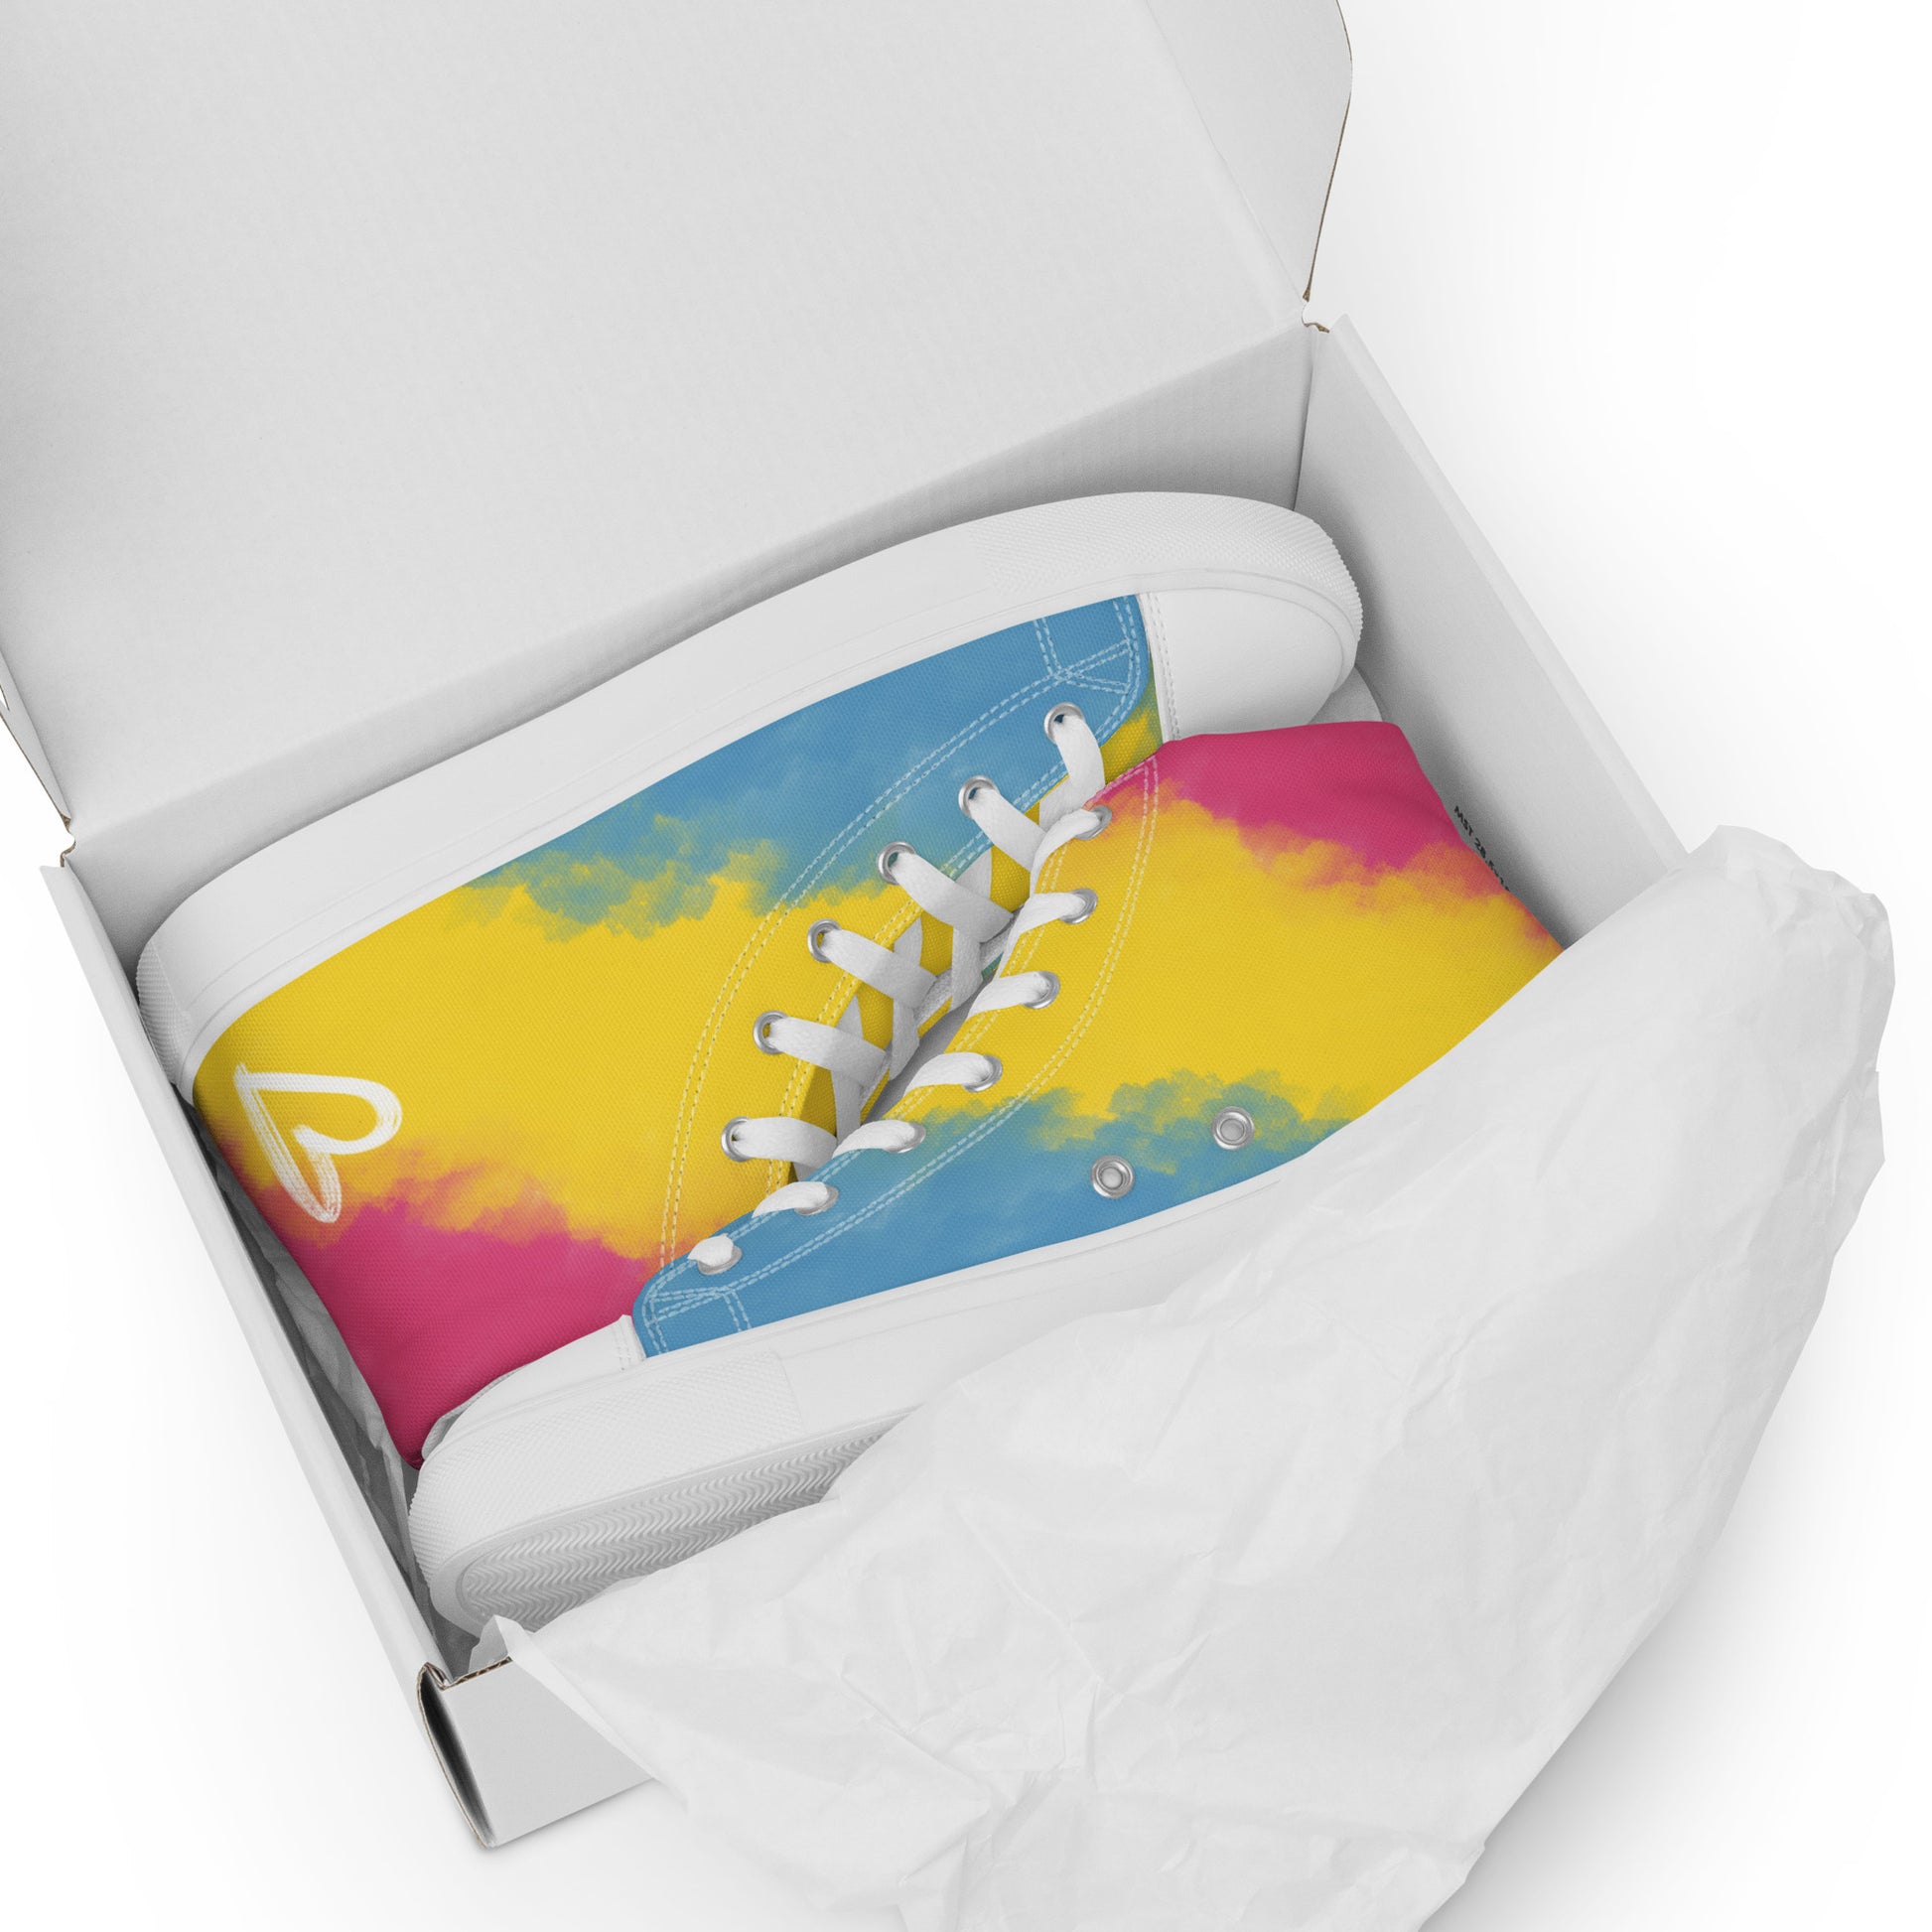 A shoebox is open to reveal a pair of high top shoes with color block pink, yellow, and blue clouds, a white hand drawn heart, and the Aras Sivad logo on the back.